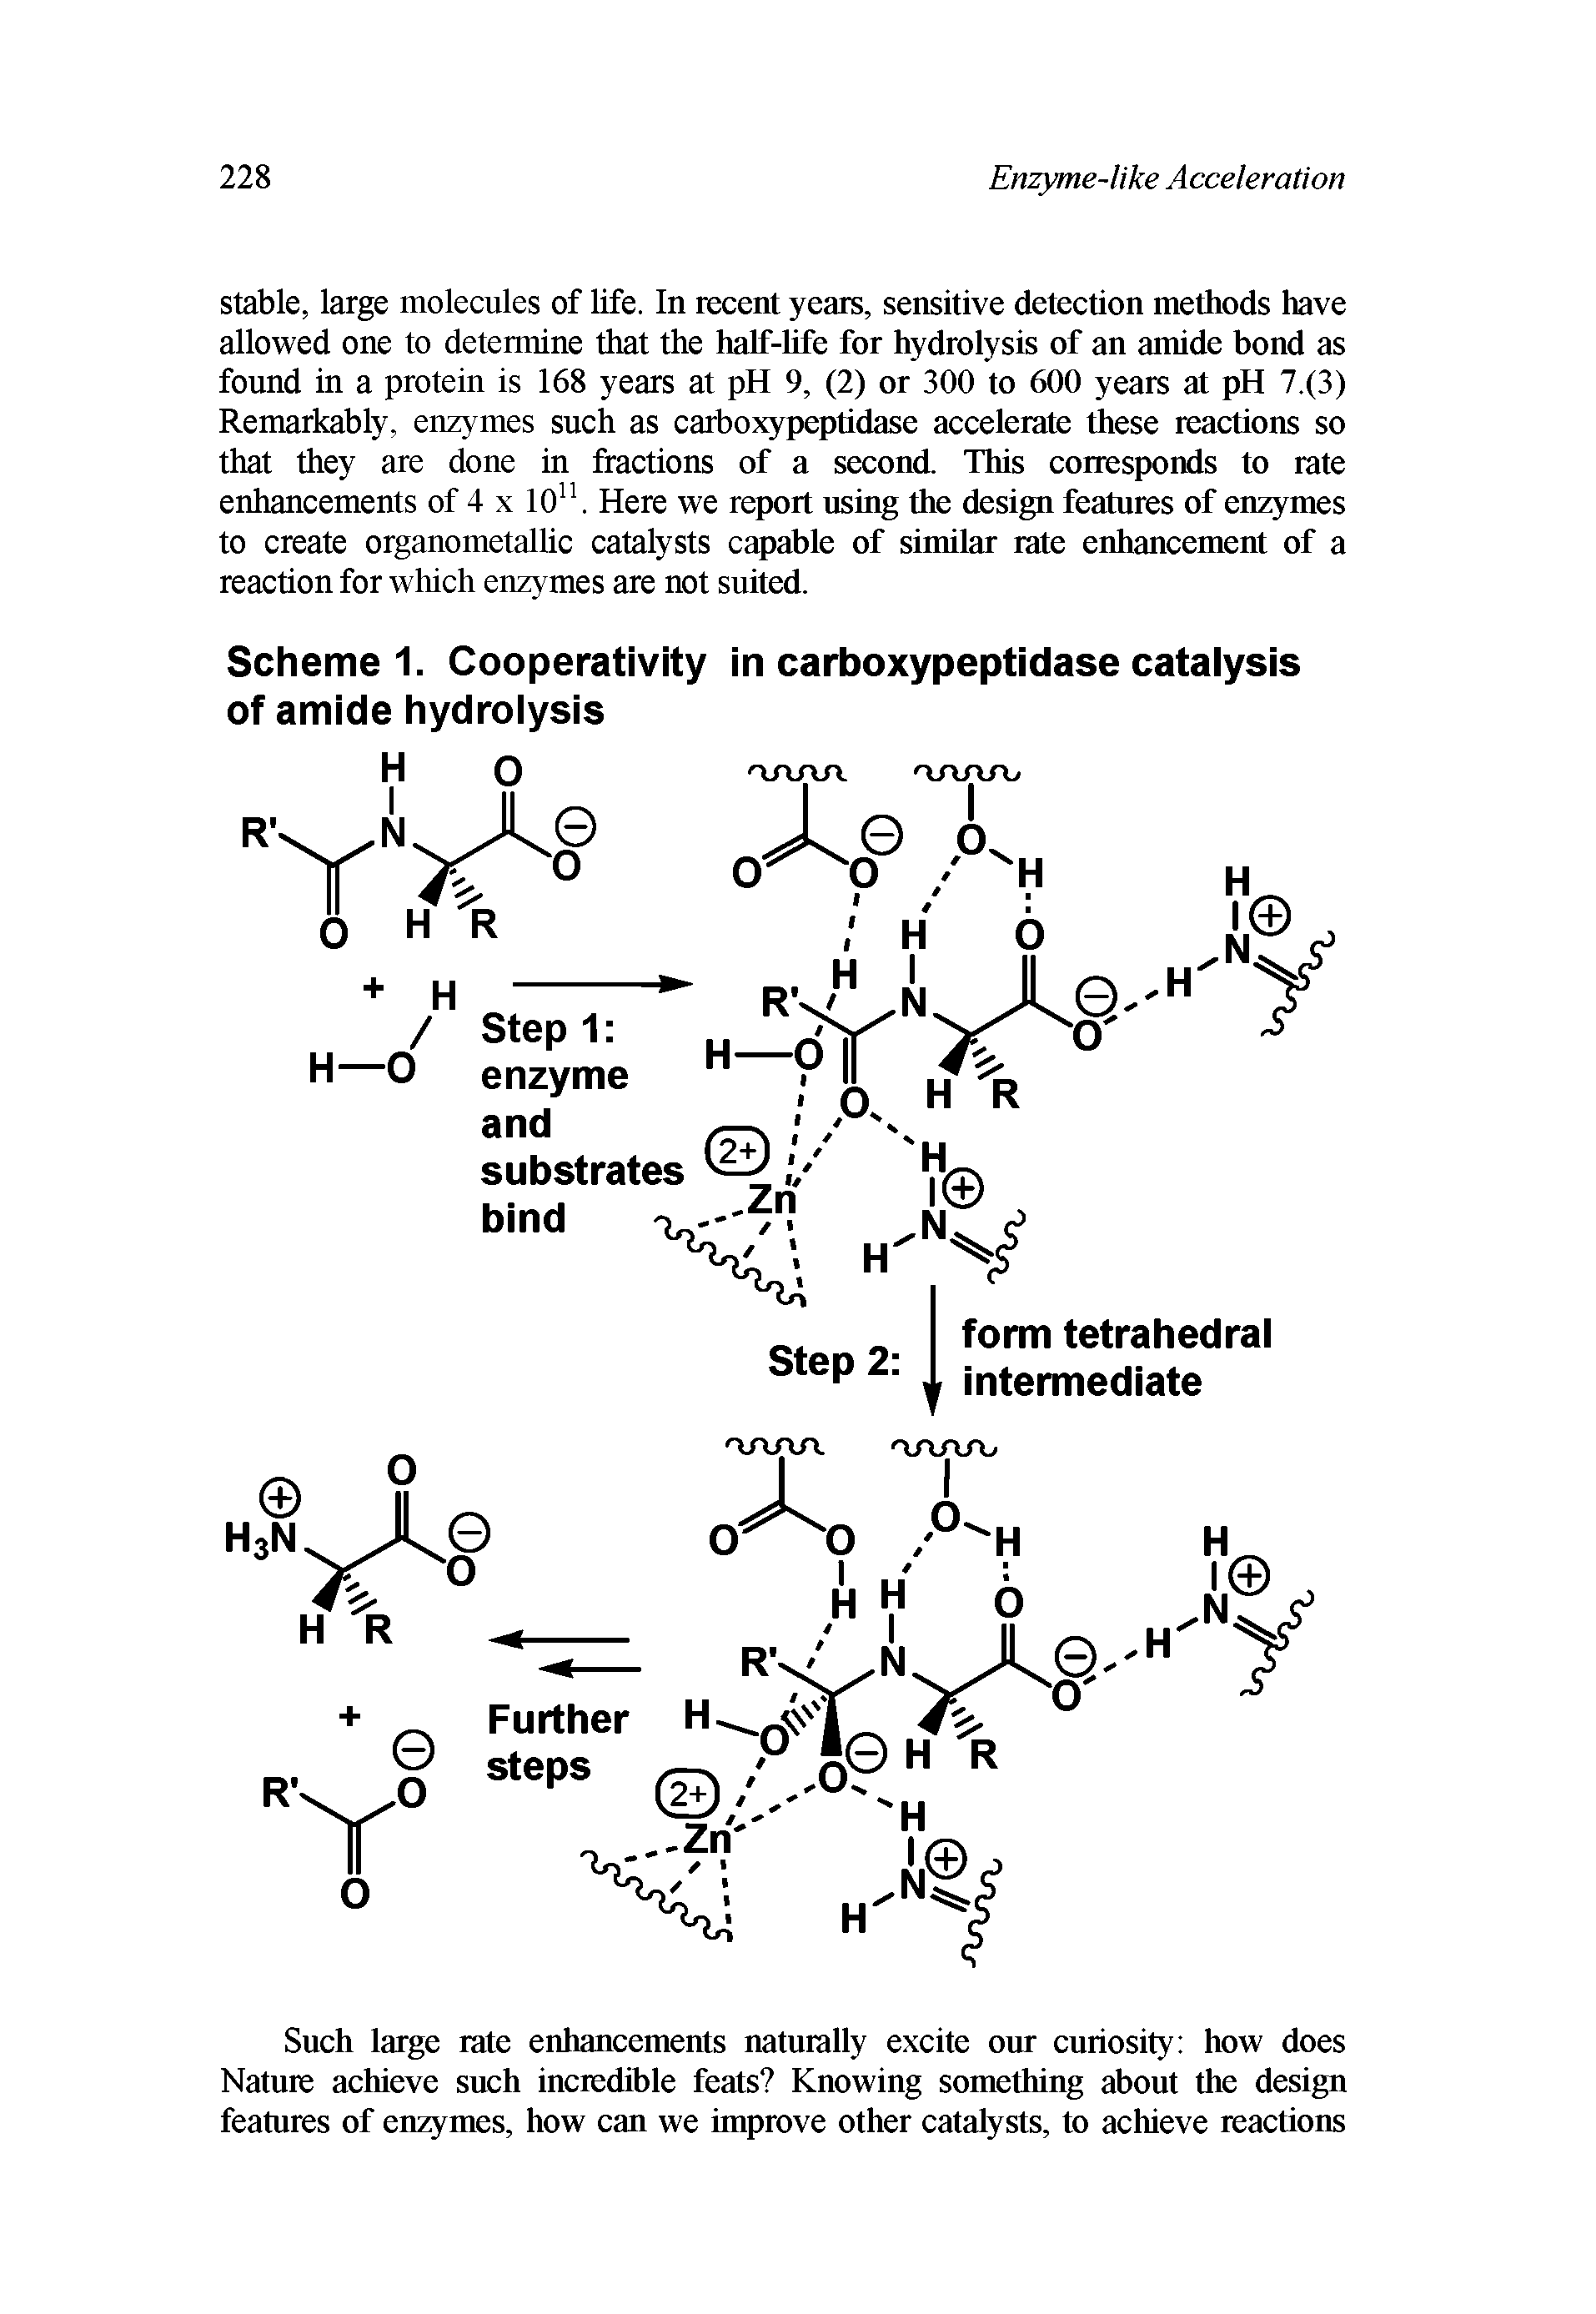 Scheme 1. Cooperativity in carboxypeptidase catalysis of amide hydrolysis...